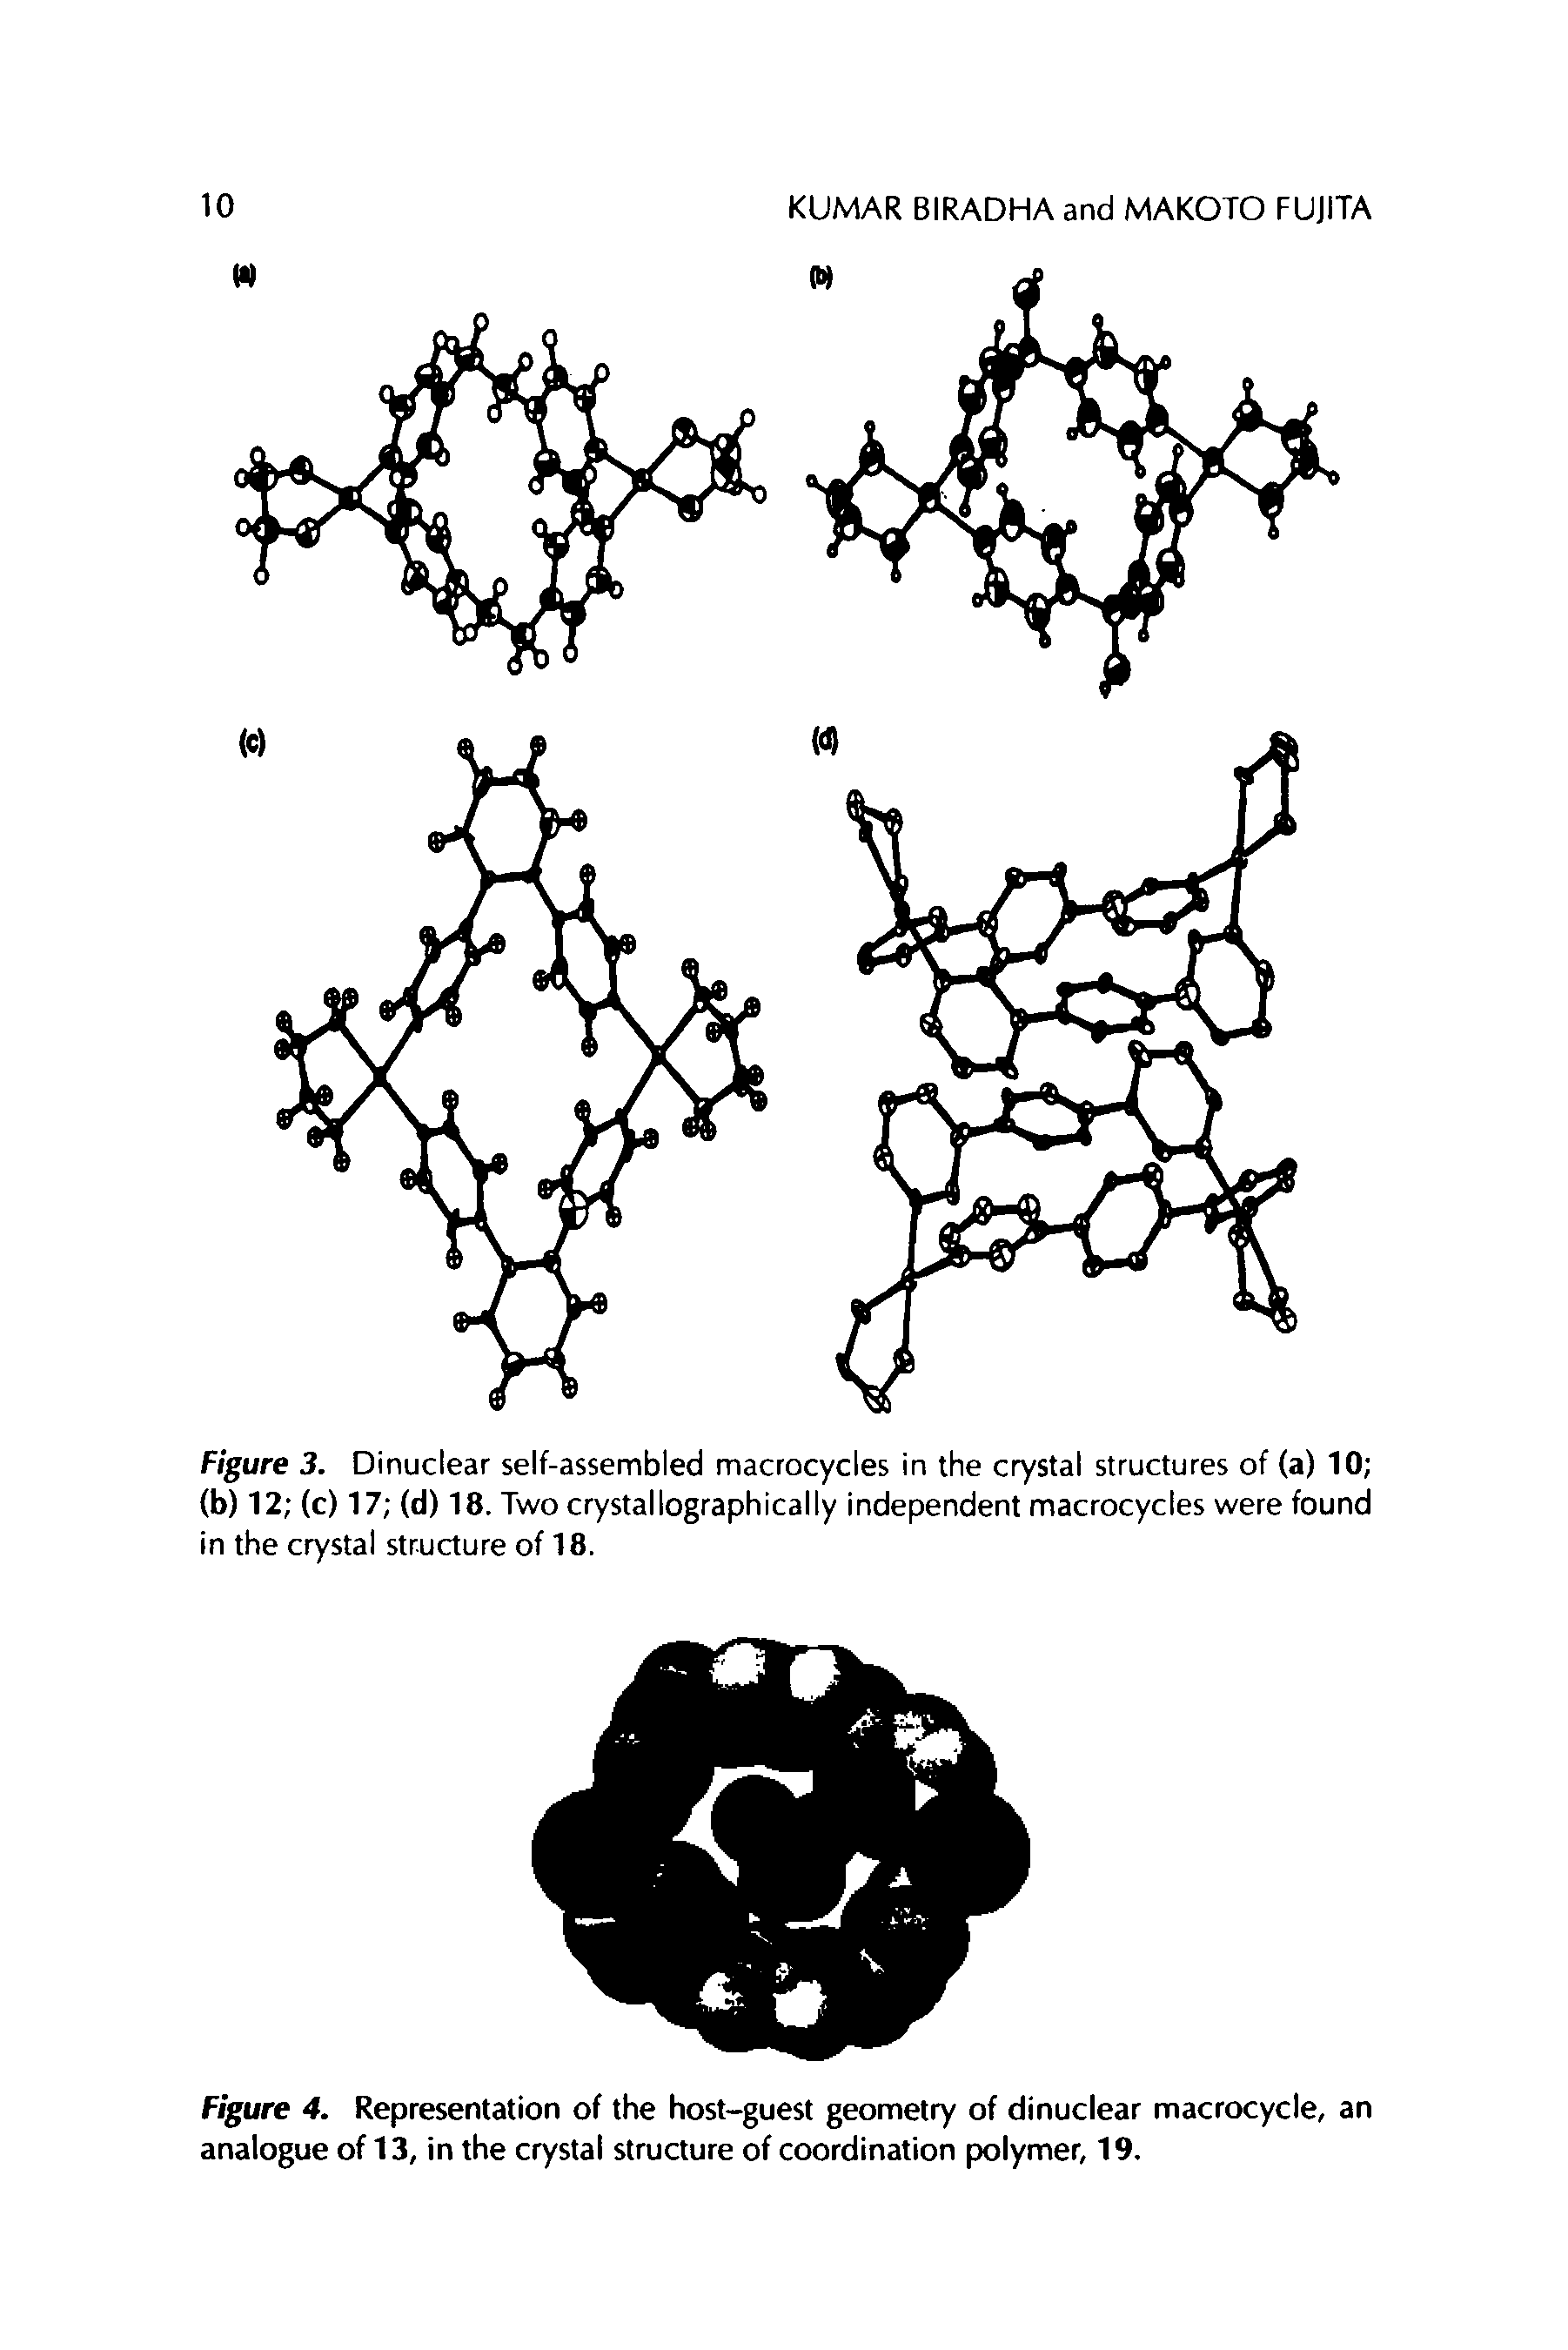 Figure 3. Dinuclear self-assembled macrocycles in the crystal structures of (a) 10 (b) 12 (c) 17 (d) 18. Two crystallographically independent macrocycles were found in the crystal structure of 18.